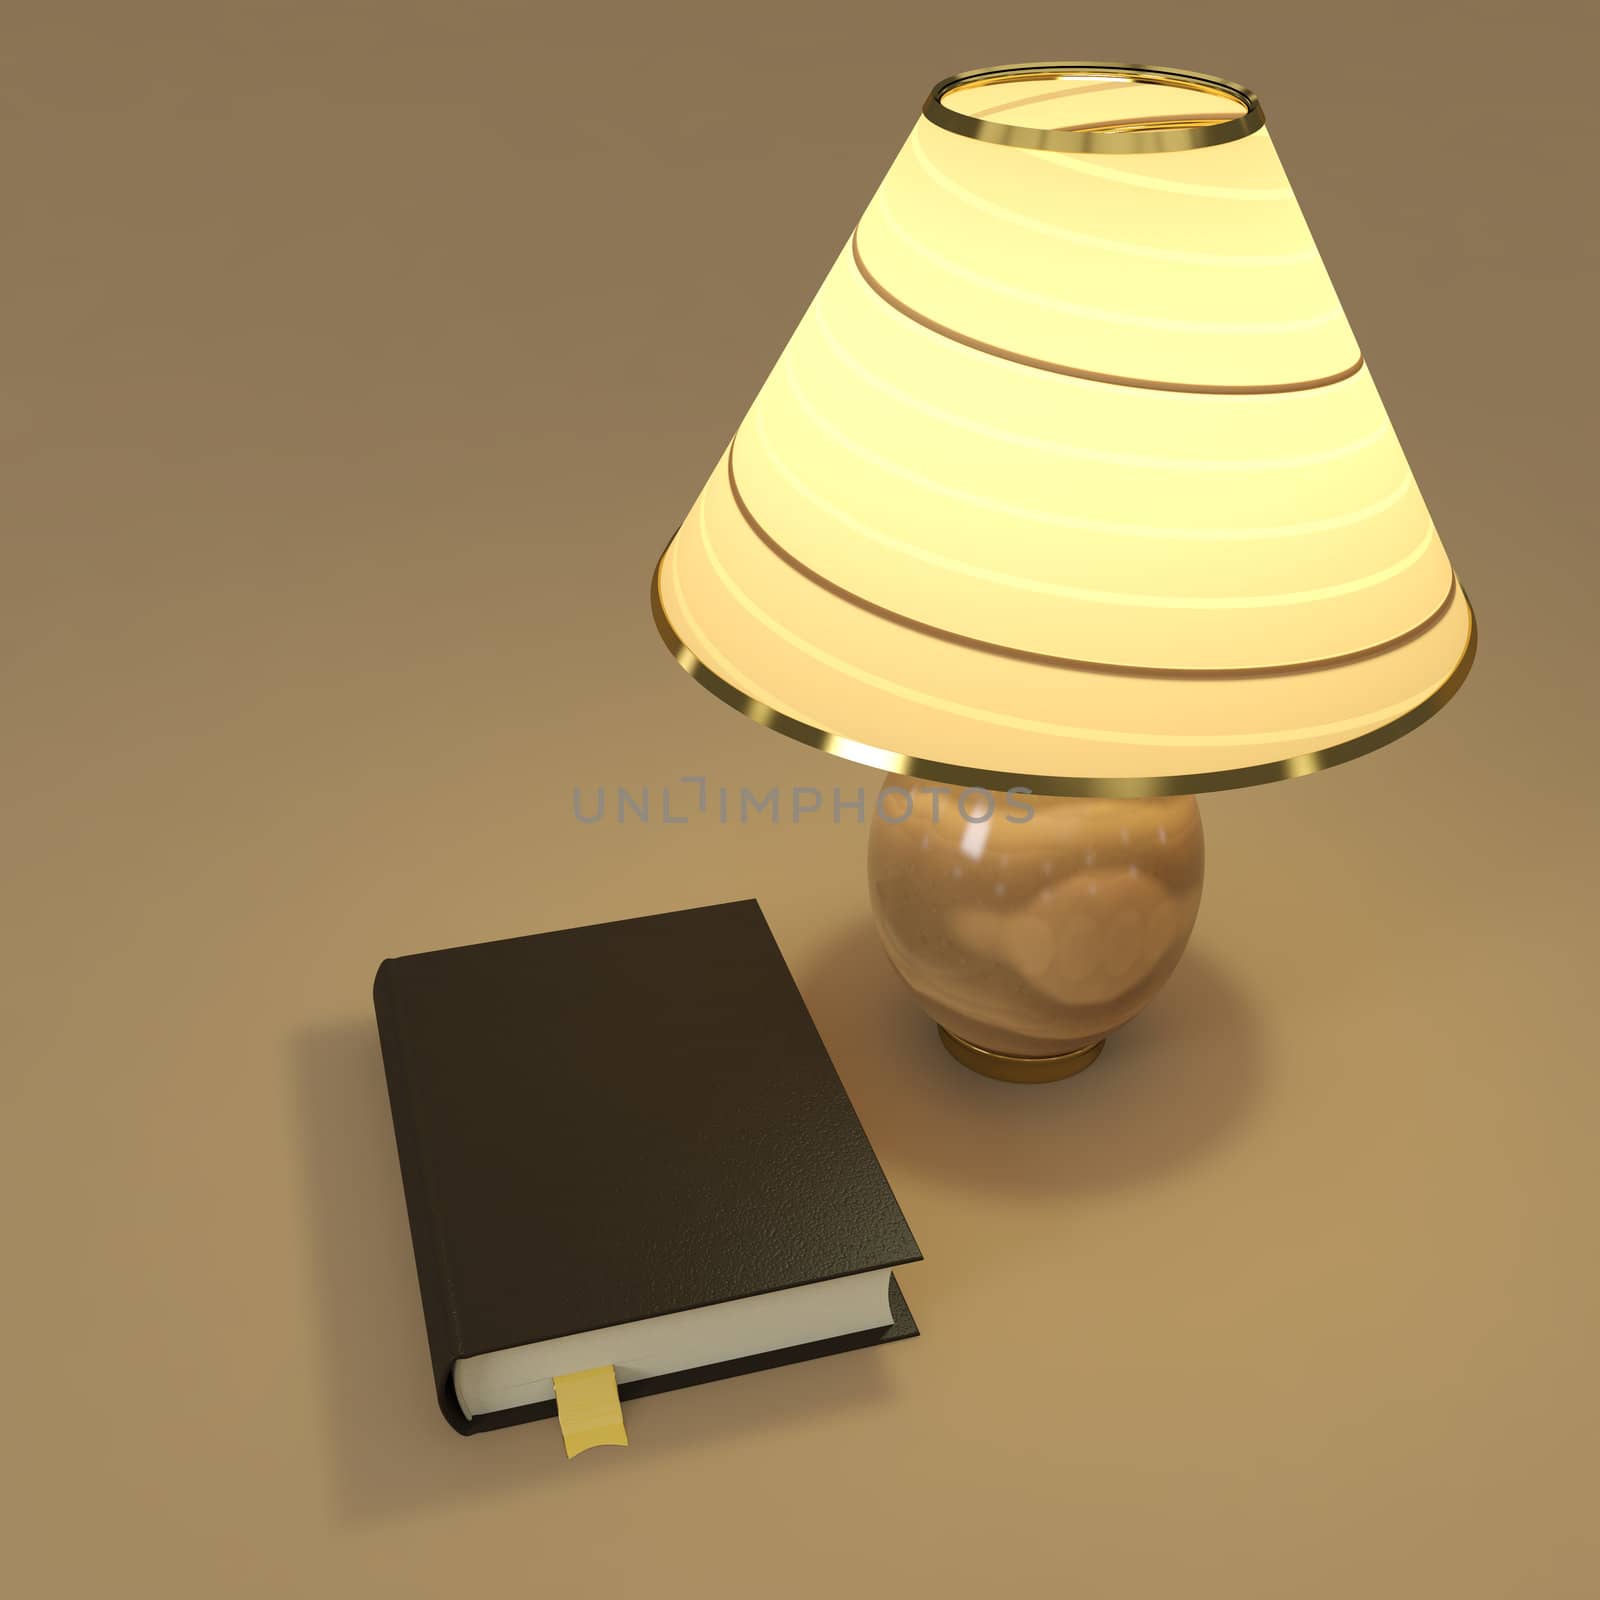 Book and table lamp composition by dmtd